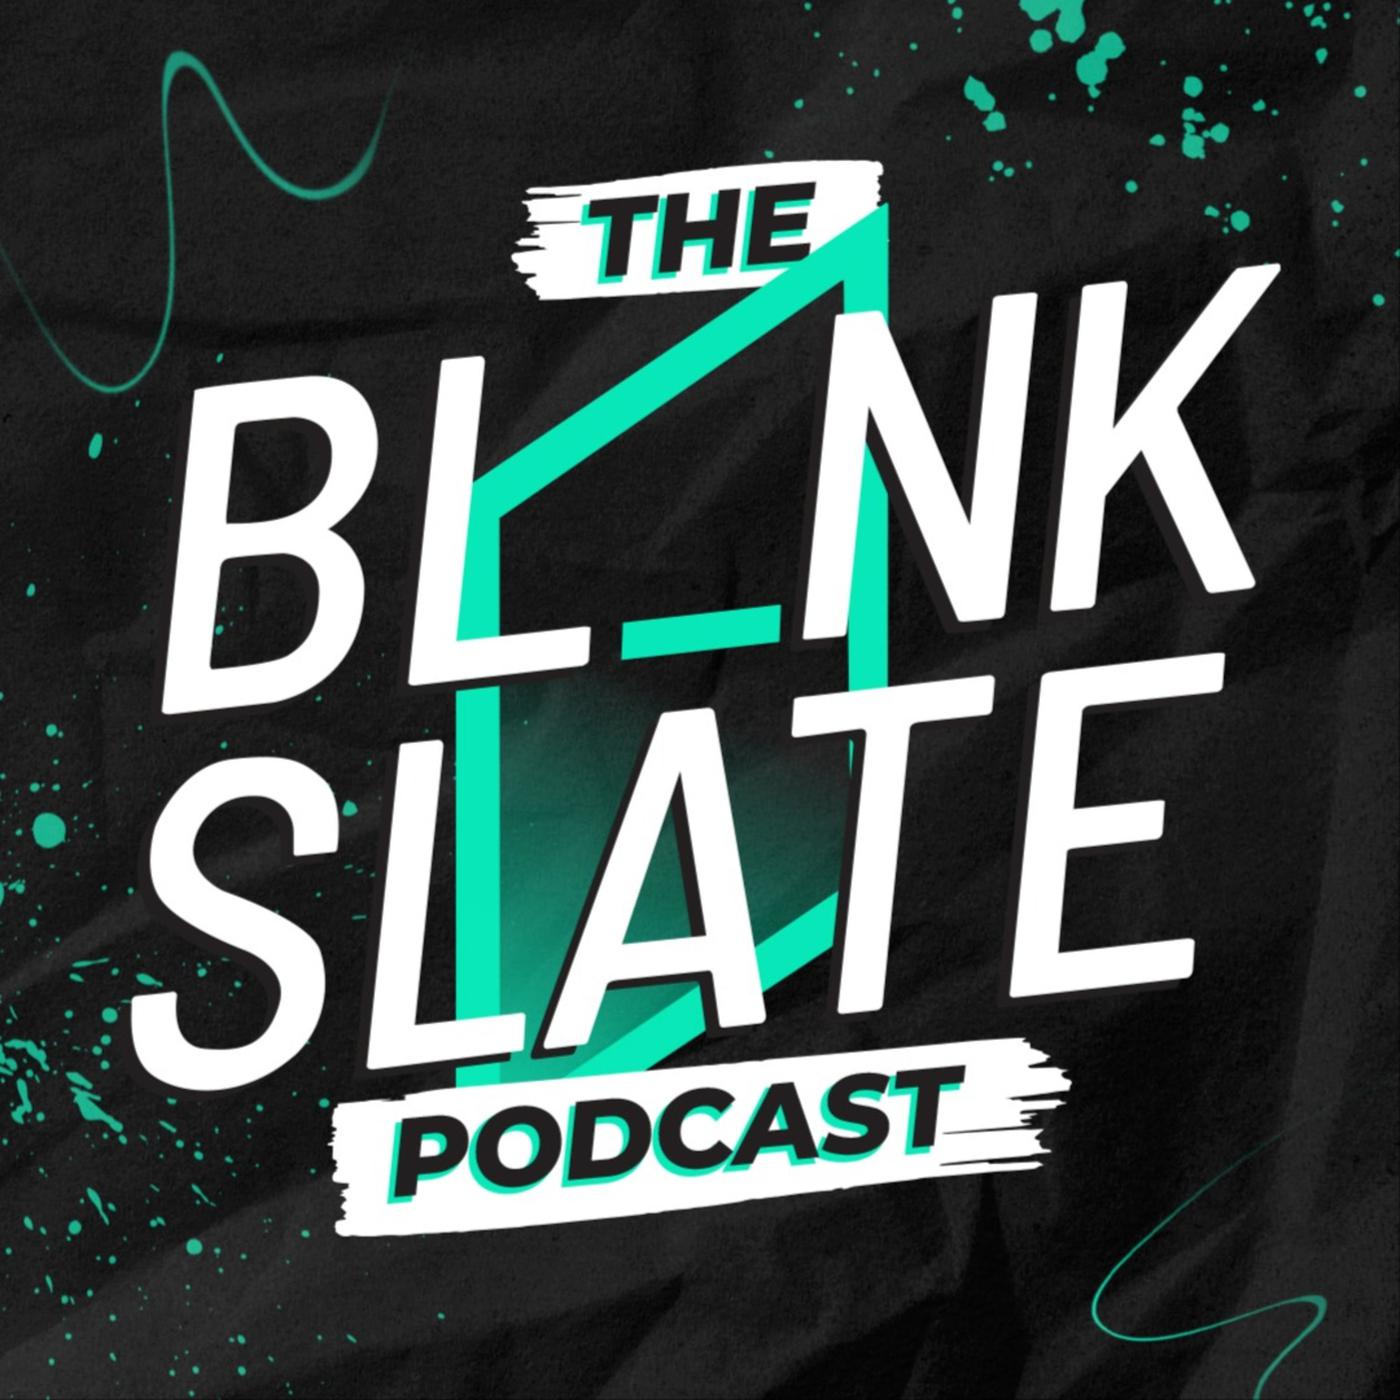 The Blink State